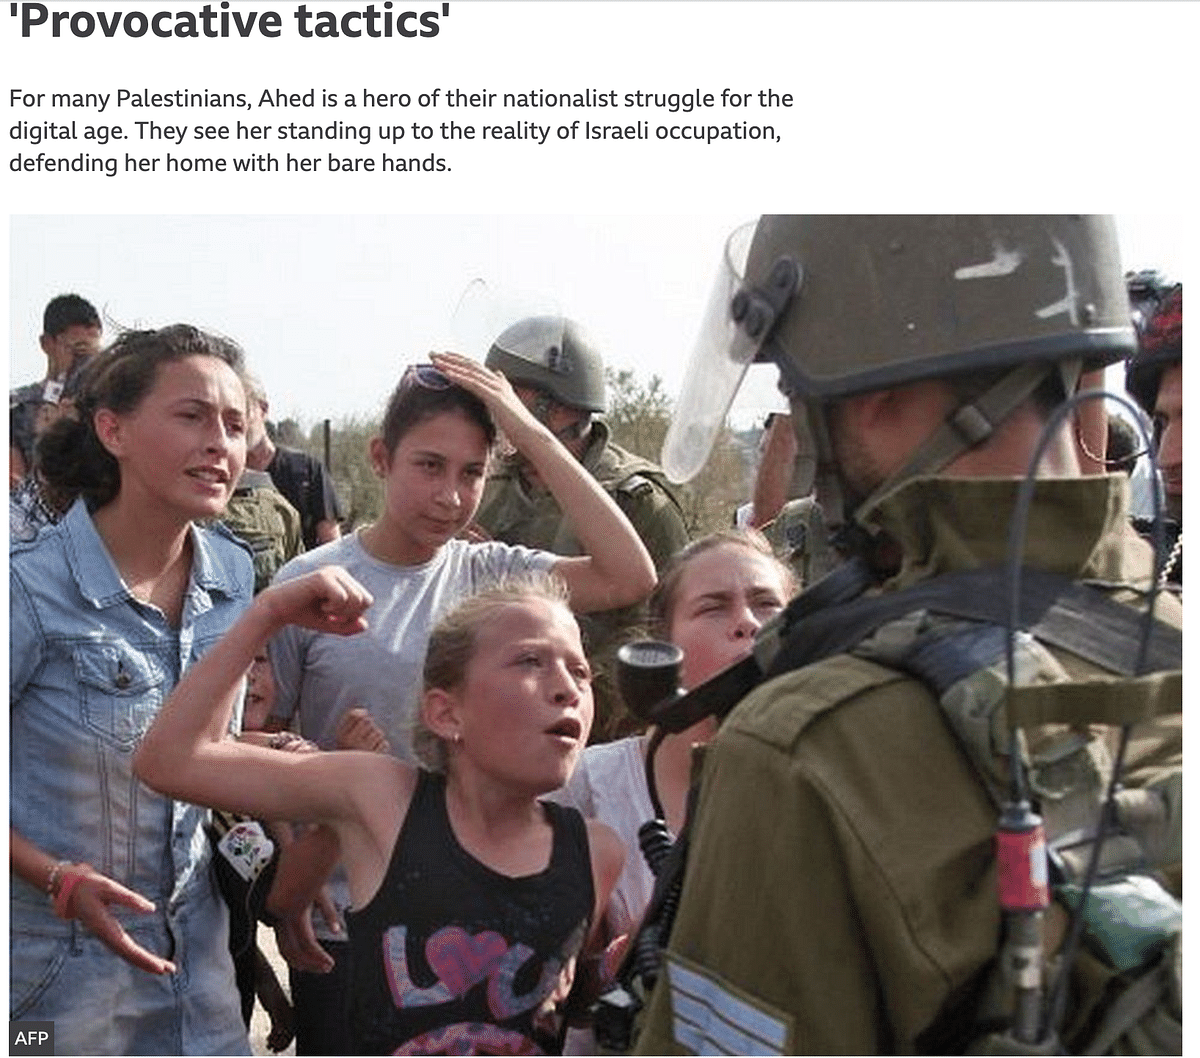 The 2012 video showed Palestinian activist Ahed Tamimi standing up to an Israeli soldier.